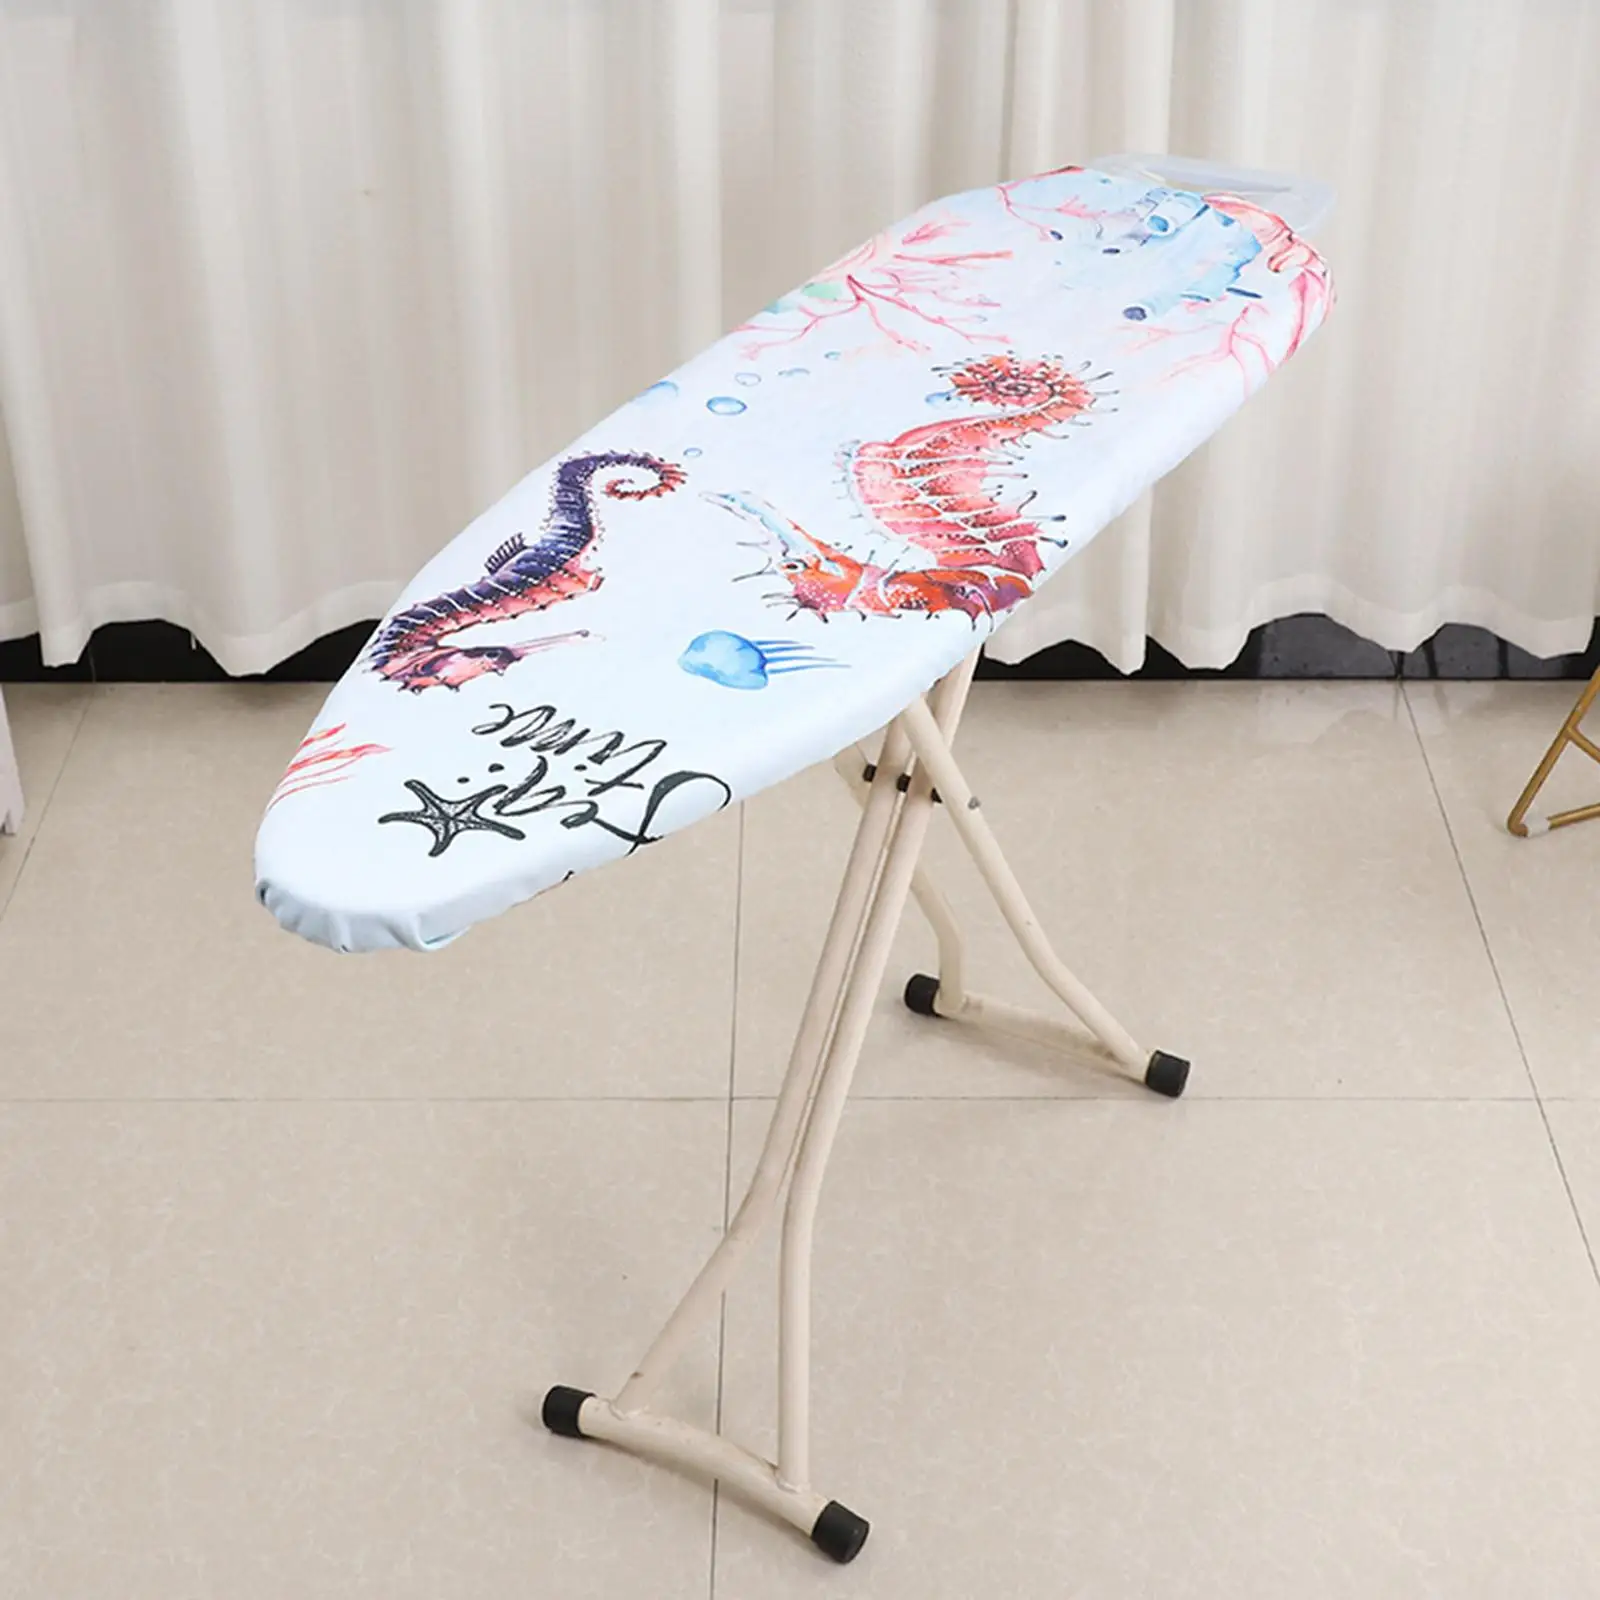 19x55inch Ironing Table Cover  Thick Padding Resists Scorching Blanket Pad Elastic Ironing Board Cover for  Laundry Supplies